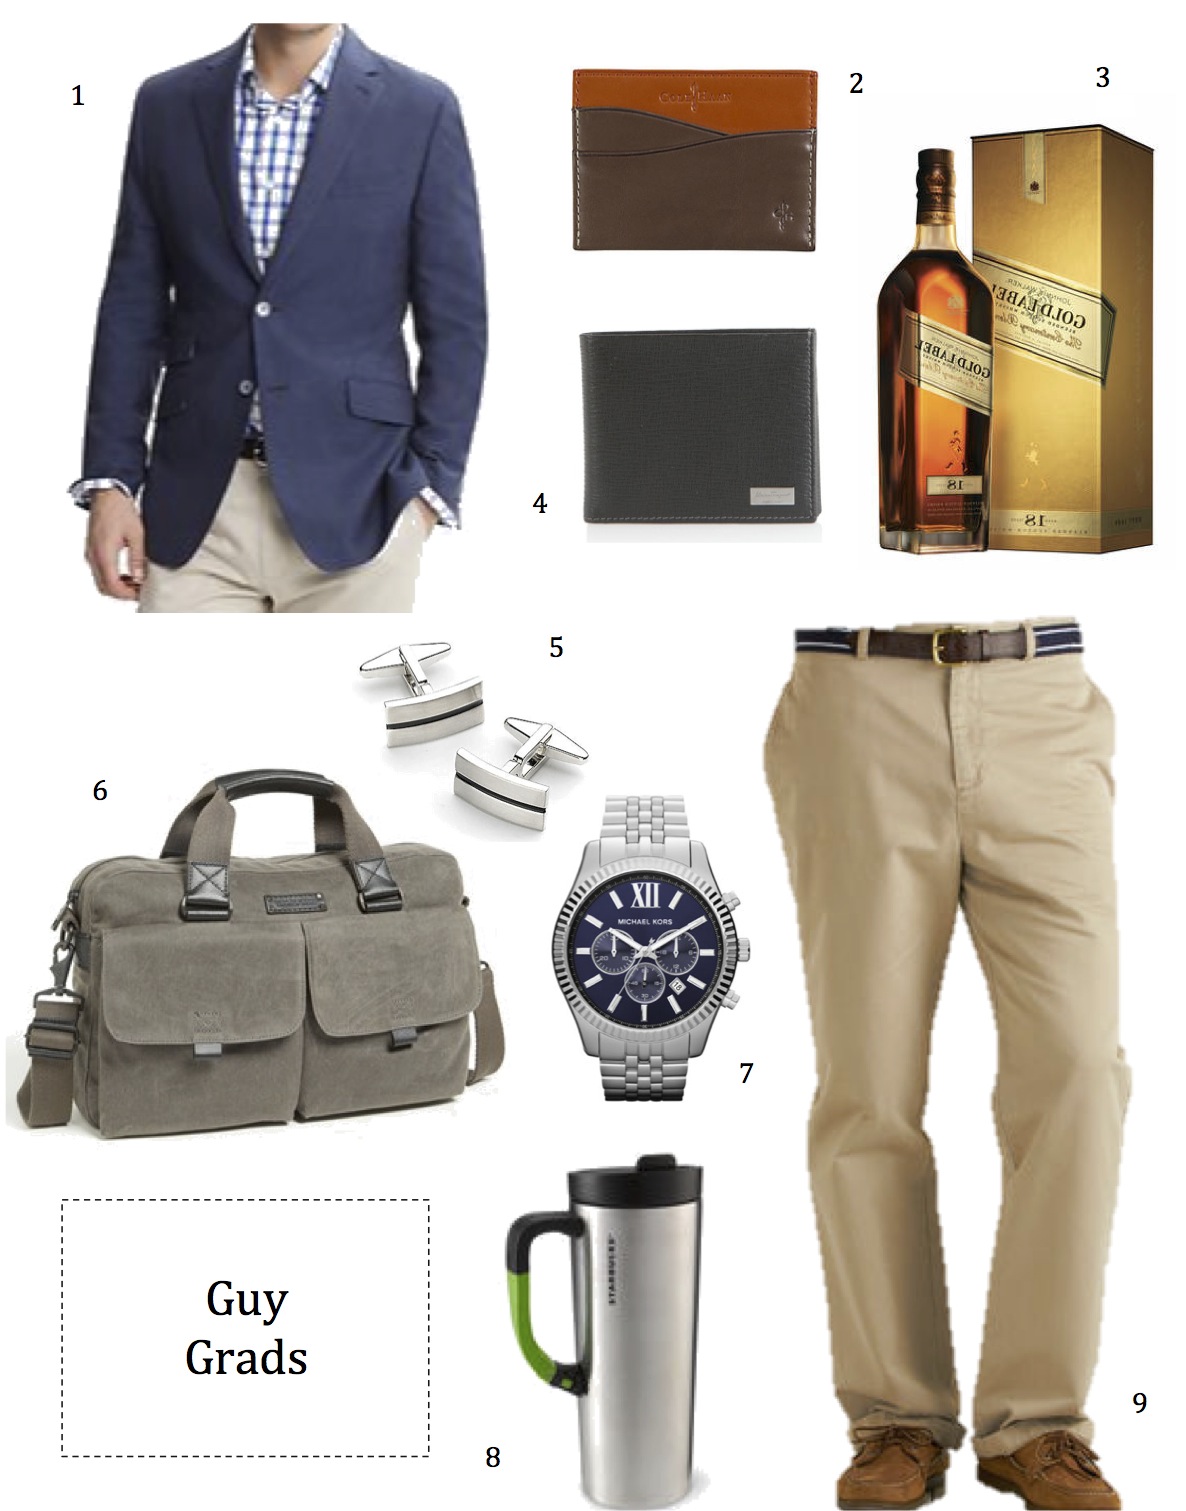 A Gift Guide for the Graduation Guy